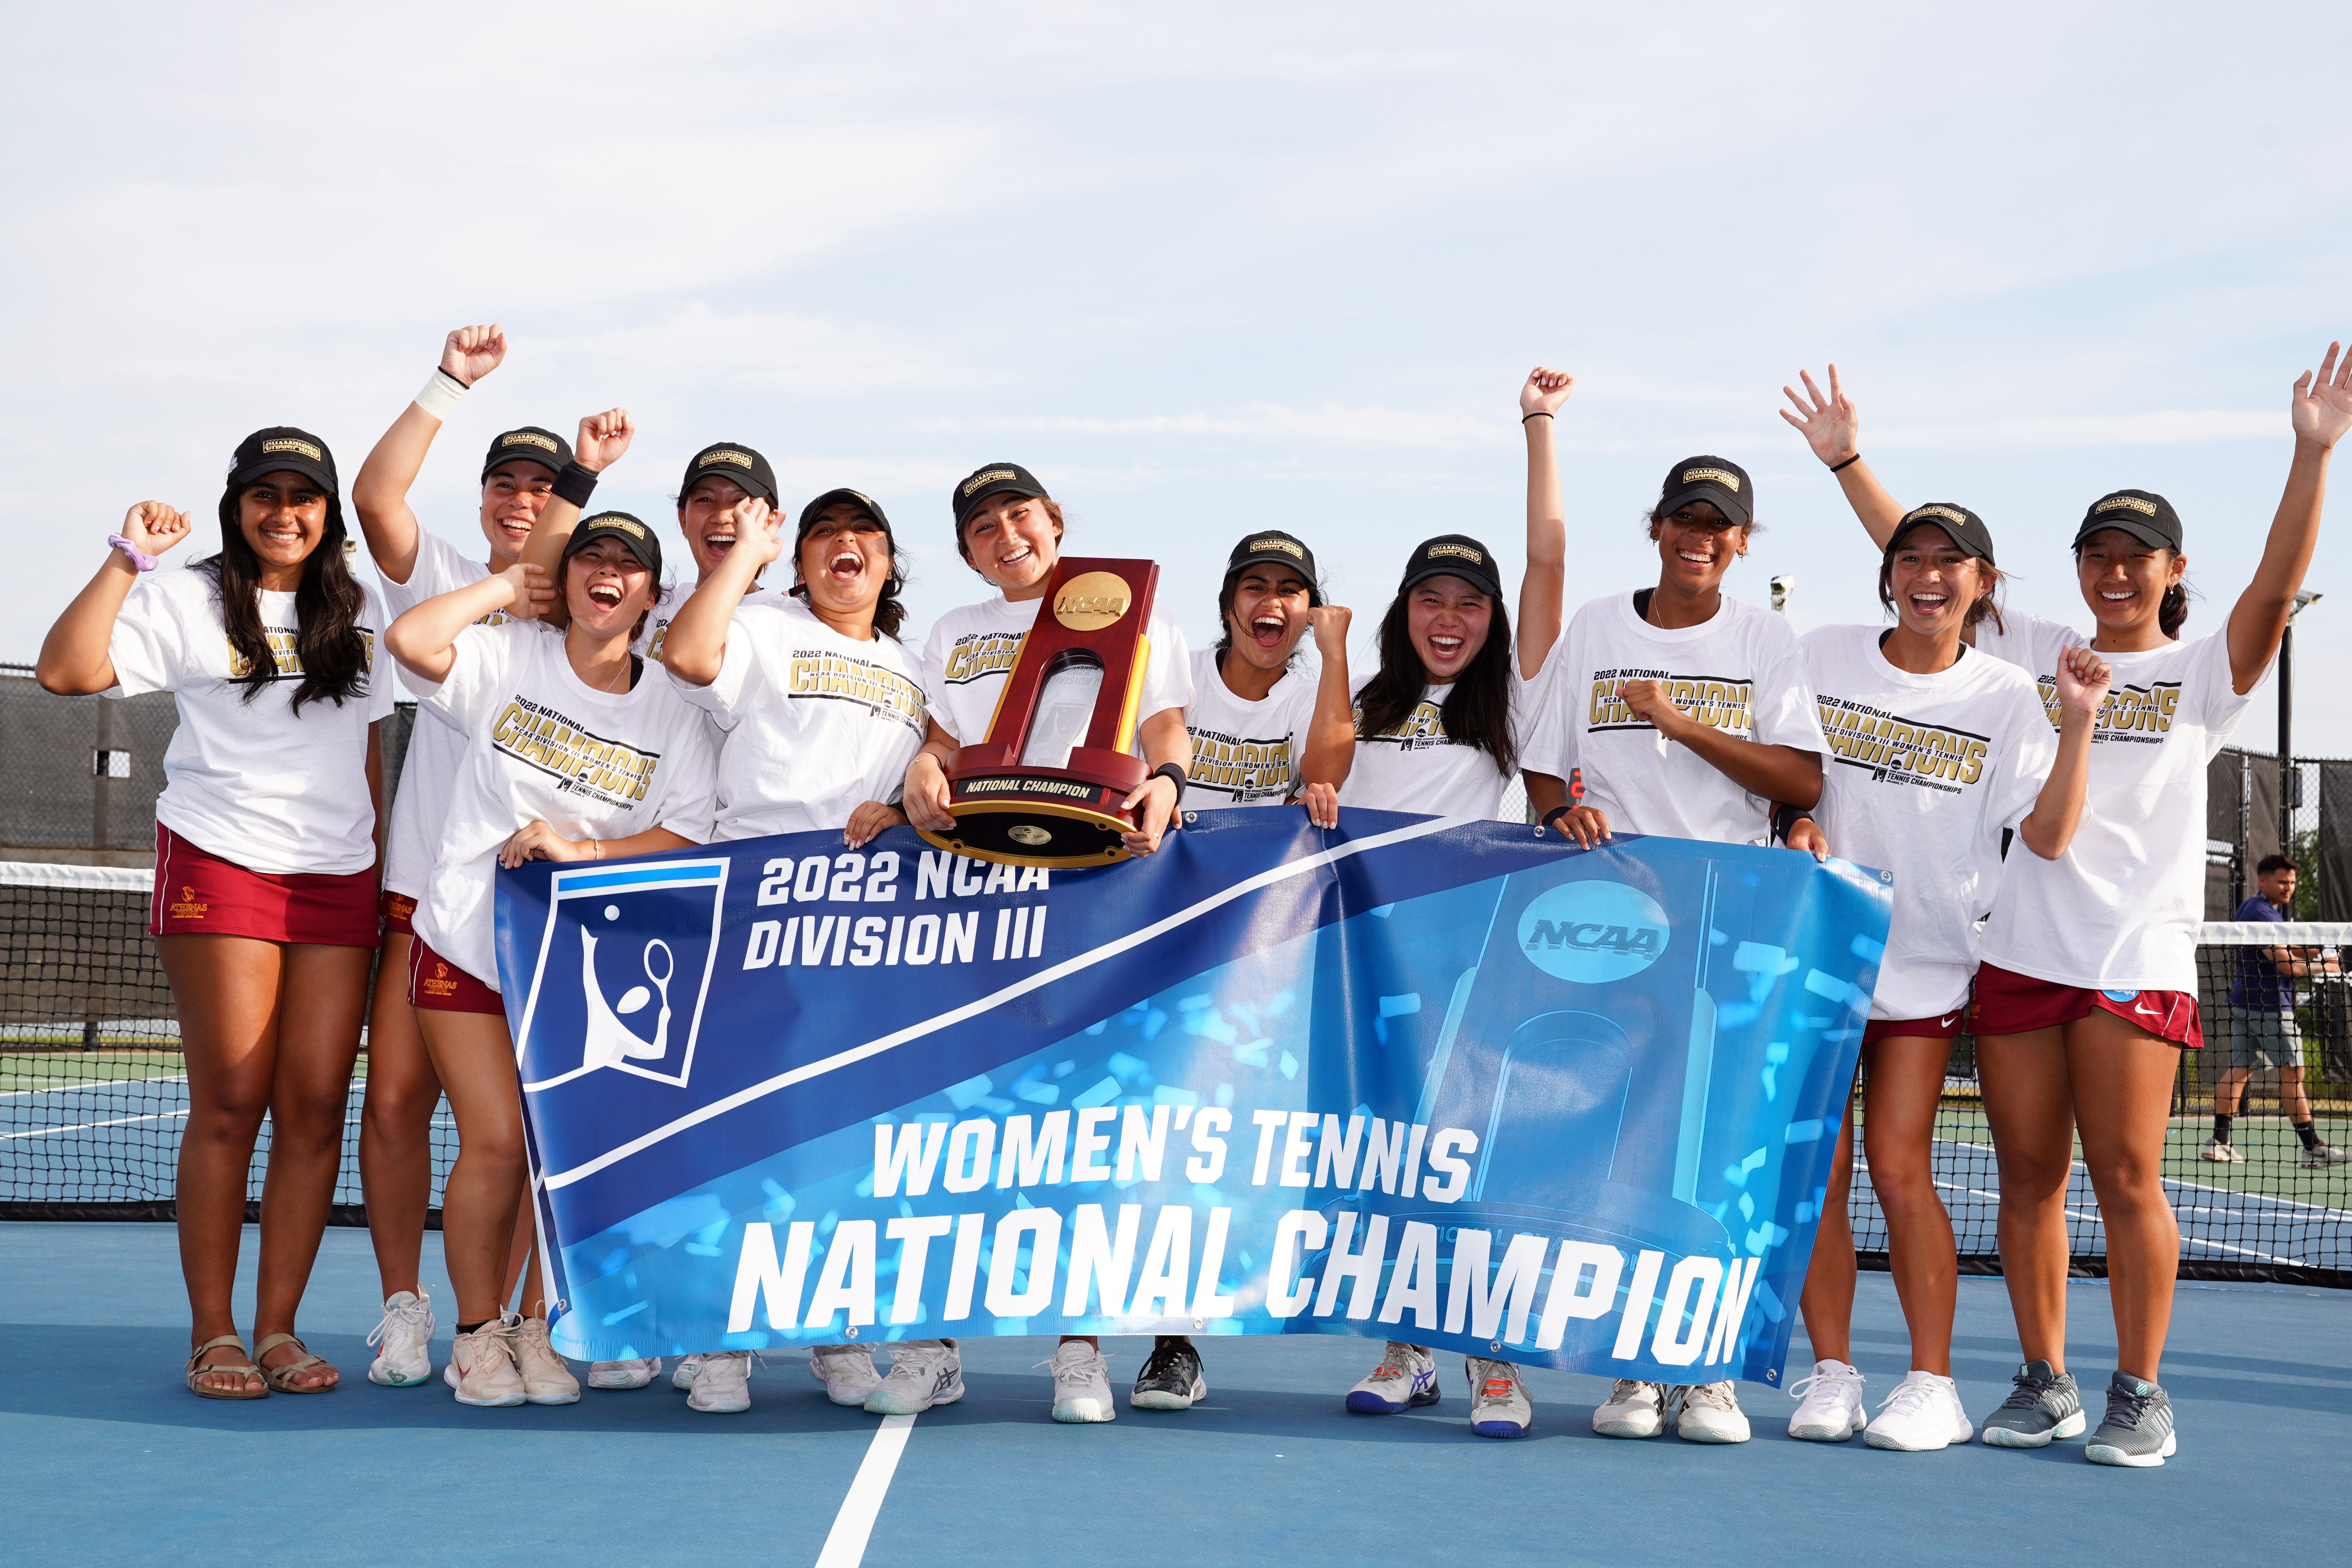 Athena tennis team, geared up in championship t-shirts and baseball caps, holds up the 2022 NCAA Division III Women's Tennis National Championship banner and award trophy.